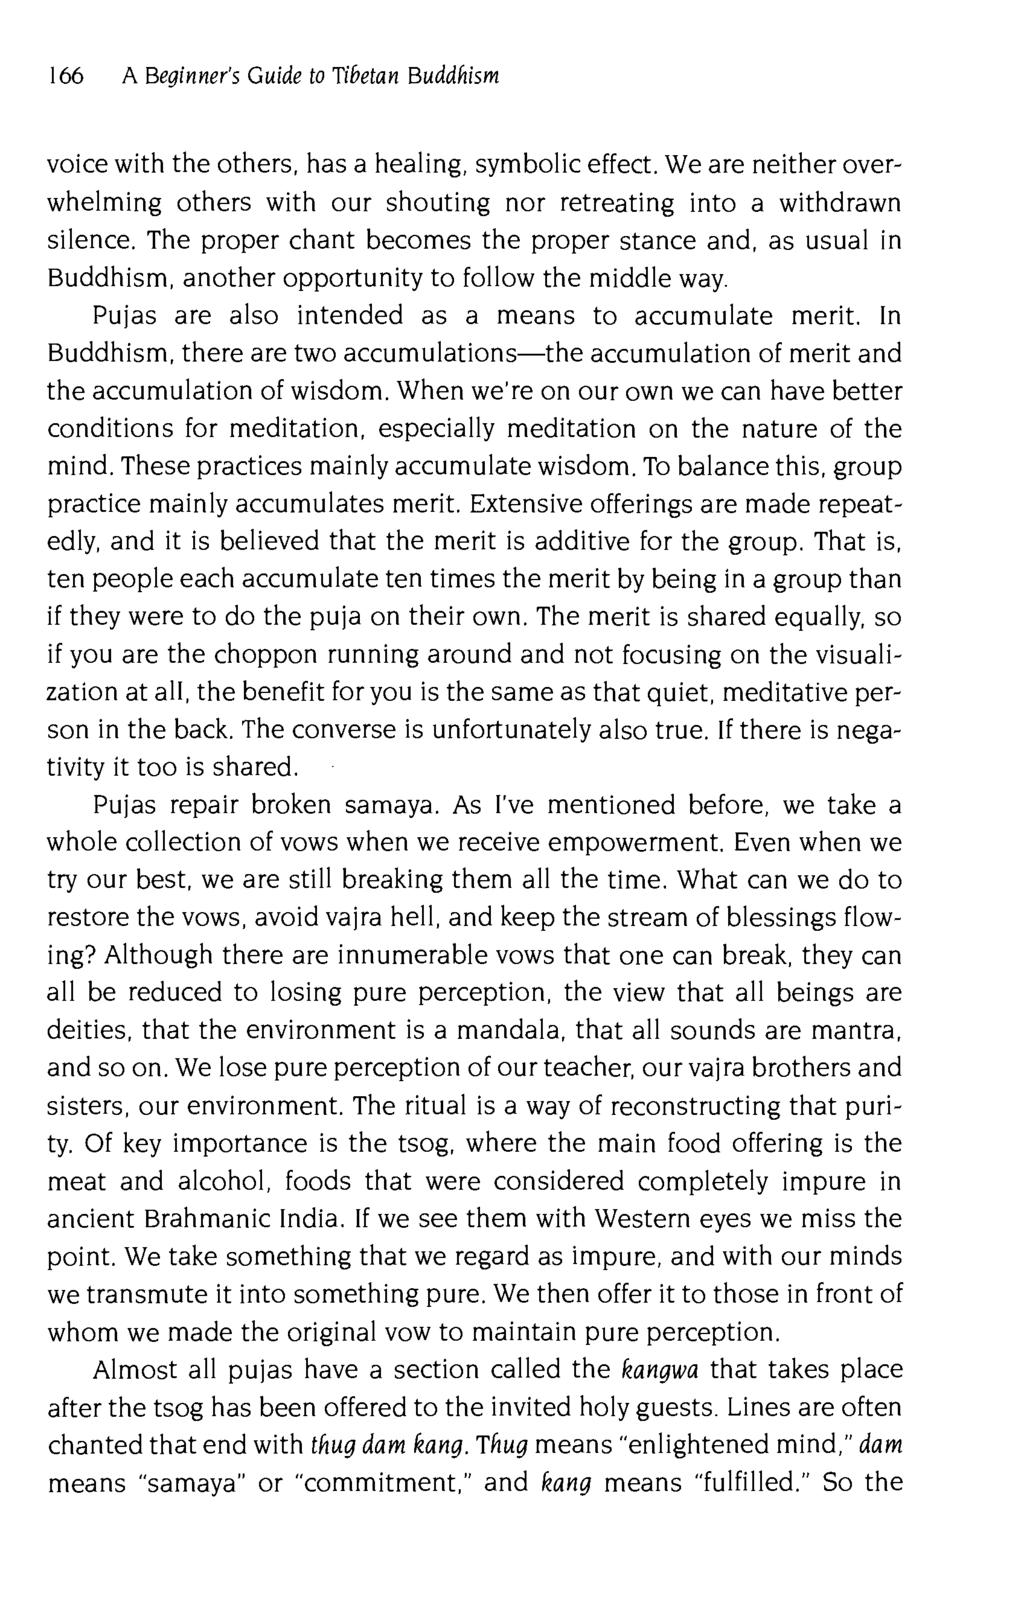 166 A Beginner's Guide to Tibetan Buddhism voice with the others, has a healing, symbolic effect. We are neither overwhelming others with our shouting nor retreating into a withdrawn silence.